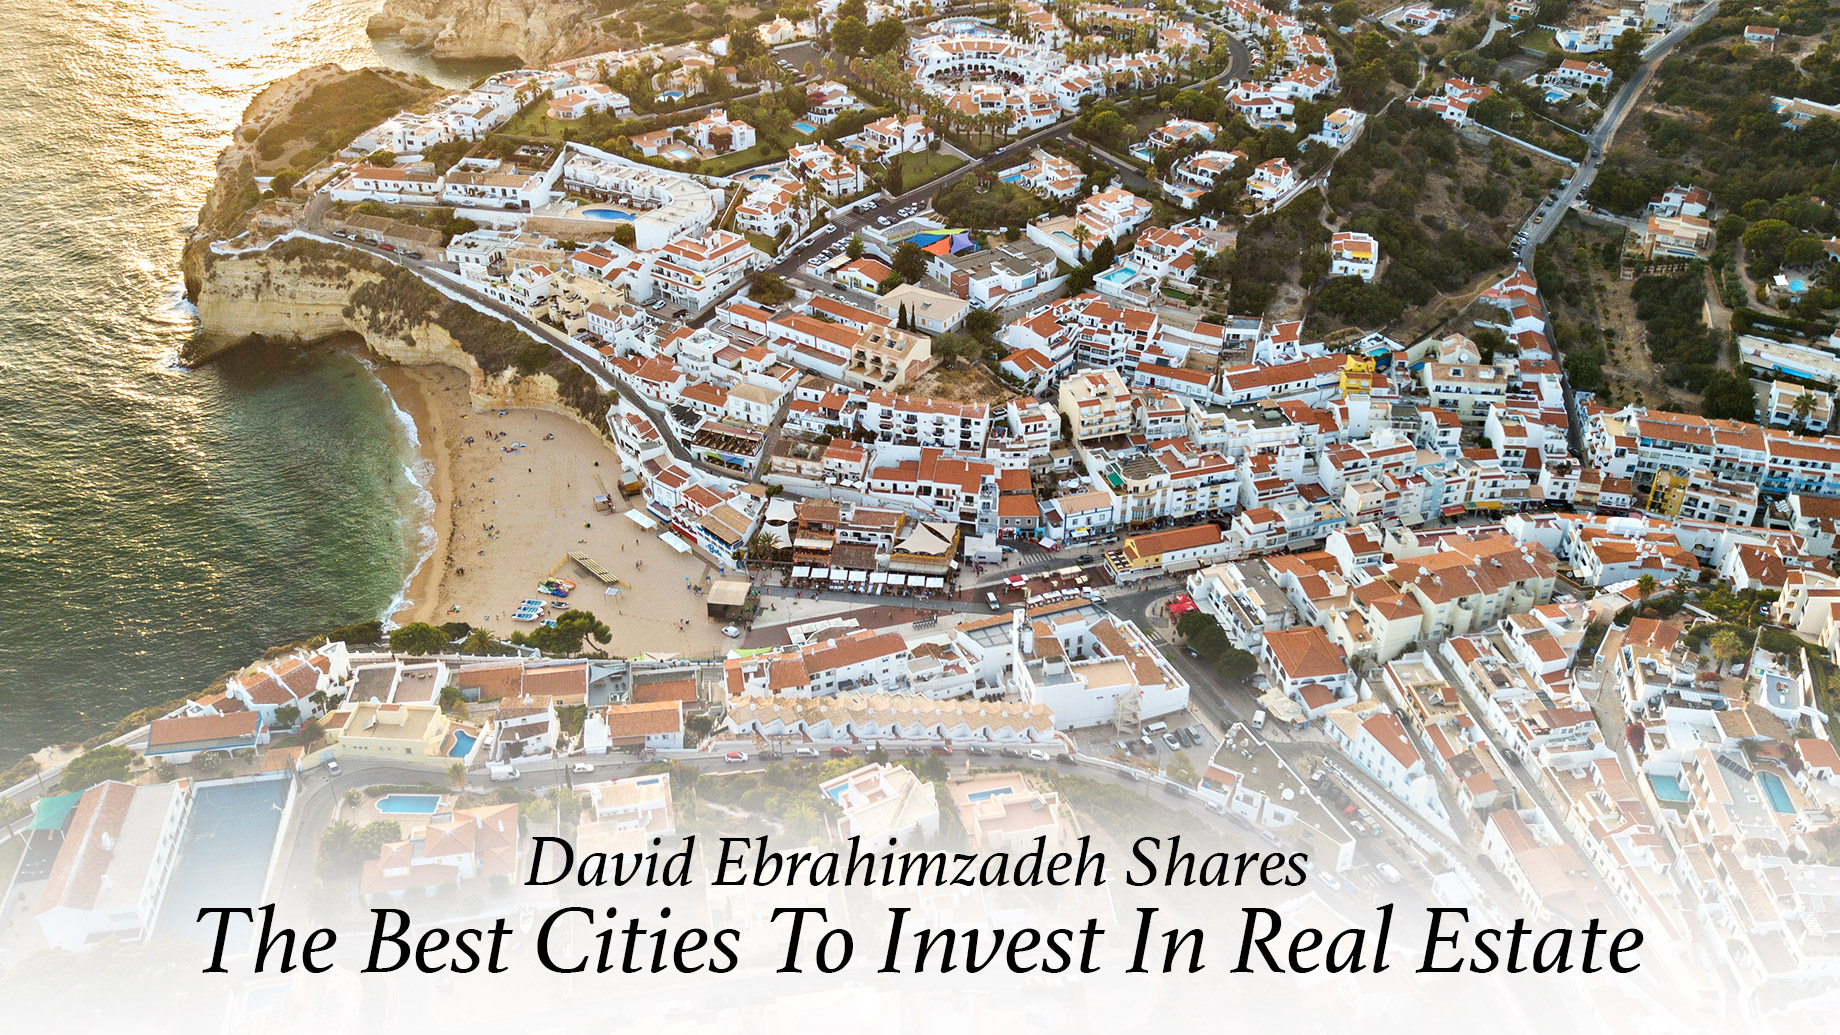 David Ebrahimzadeh Shares The Best Cities To Invest In Real Estate